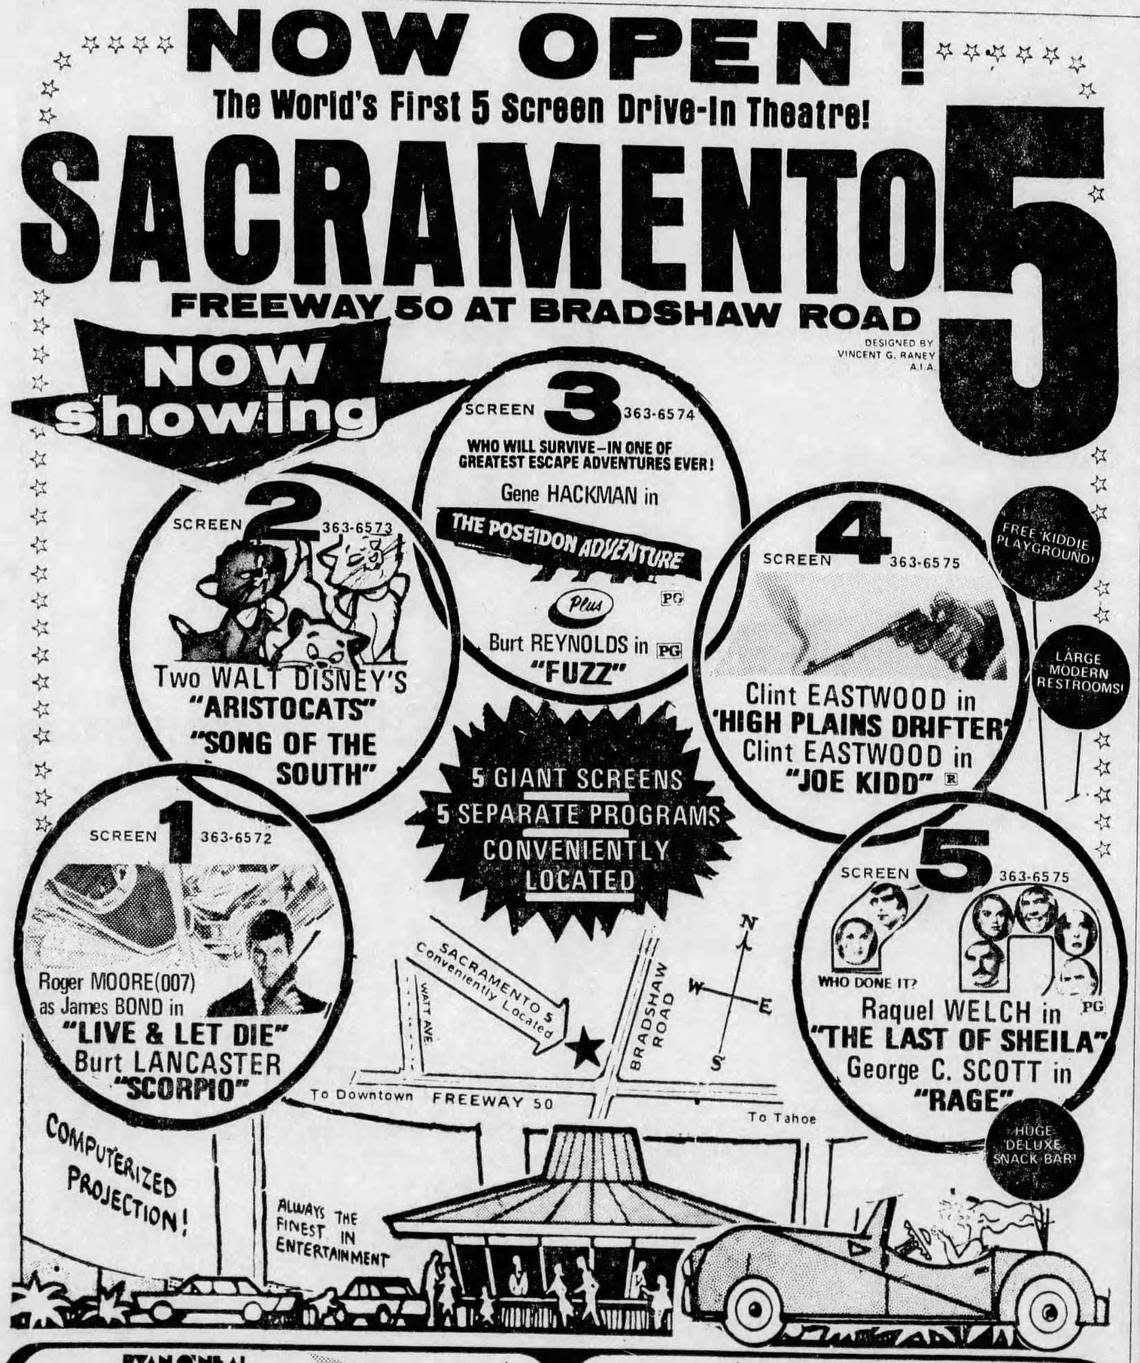 The Sacramento 6 Drive-in, formerly Sacramento 5, announces its opening in and advertisement in the June 30, 1973, edition of The Sacramento Bee.